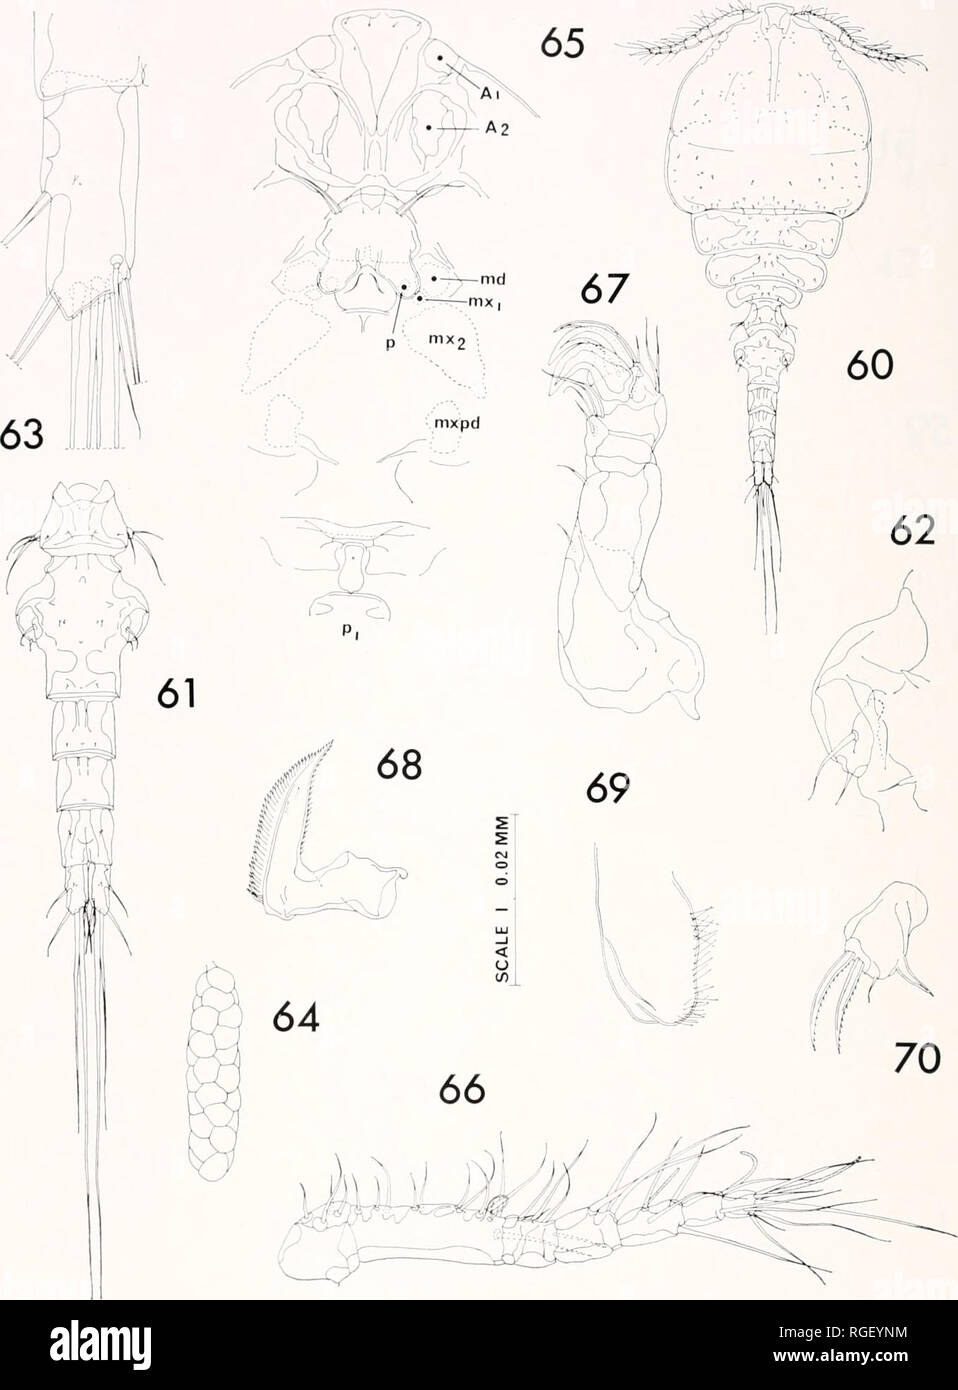 . Bulletin of the Museum of Comparative Zoology at Harvard College. Zoology. 406 Bulletin Mti.scuiii of Comparative Zoology, Vol. 135, No.. Figures 60-70. Nosomo/gus f'lrmus n. sp., female. 60, dorsal (H); 61, urosome, dorsal (G); 62, area of attachment of egg sac, dorsal (C); 63, caudal ramus, dorsal (F); 64, egg sac (H); 65, median part of ceptialosome, ventral (E); 66, first antenna, ventrol (D); 67, second antenna, anterior (C); 68, mandible, ventral (C); 69, paragnath, ventral (I); 70, first maxilla, anteroventral (F).. Please note that these images are extracted from scanned page images  Stock Photo